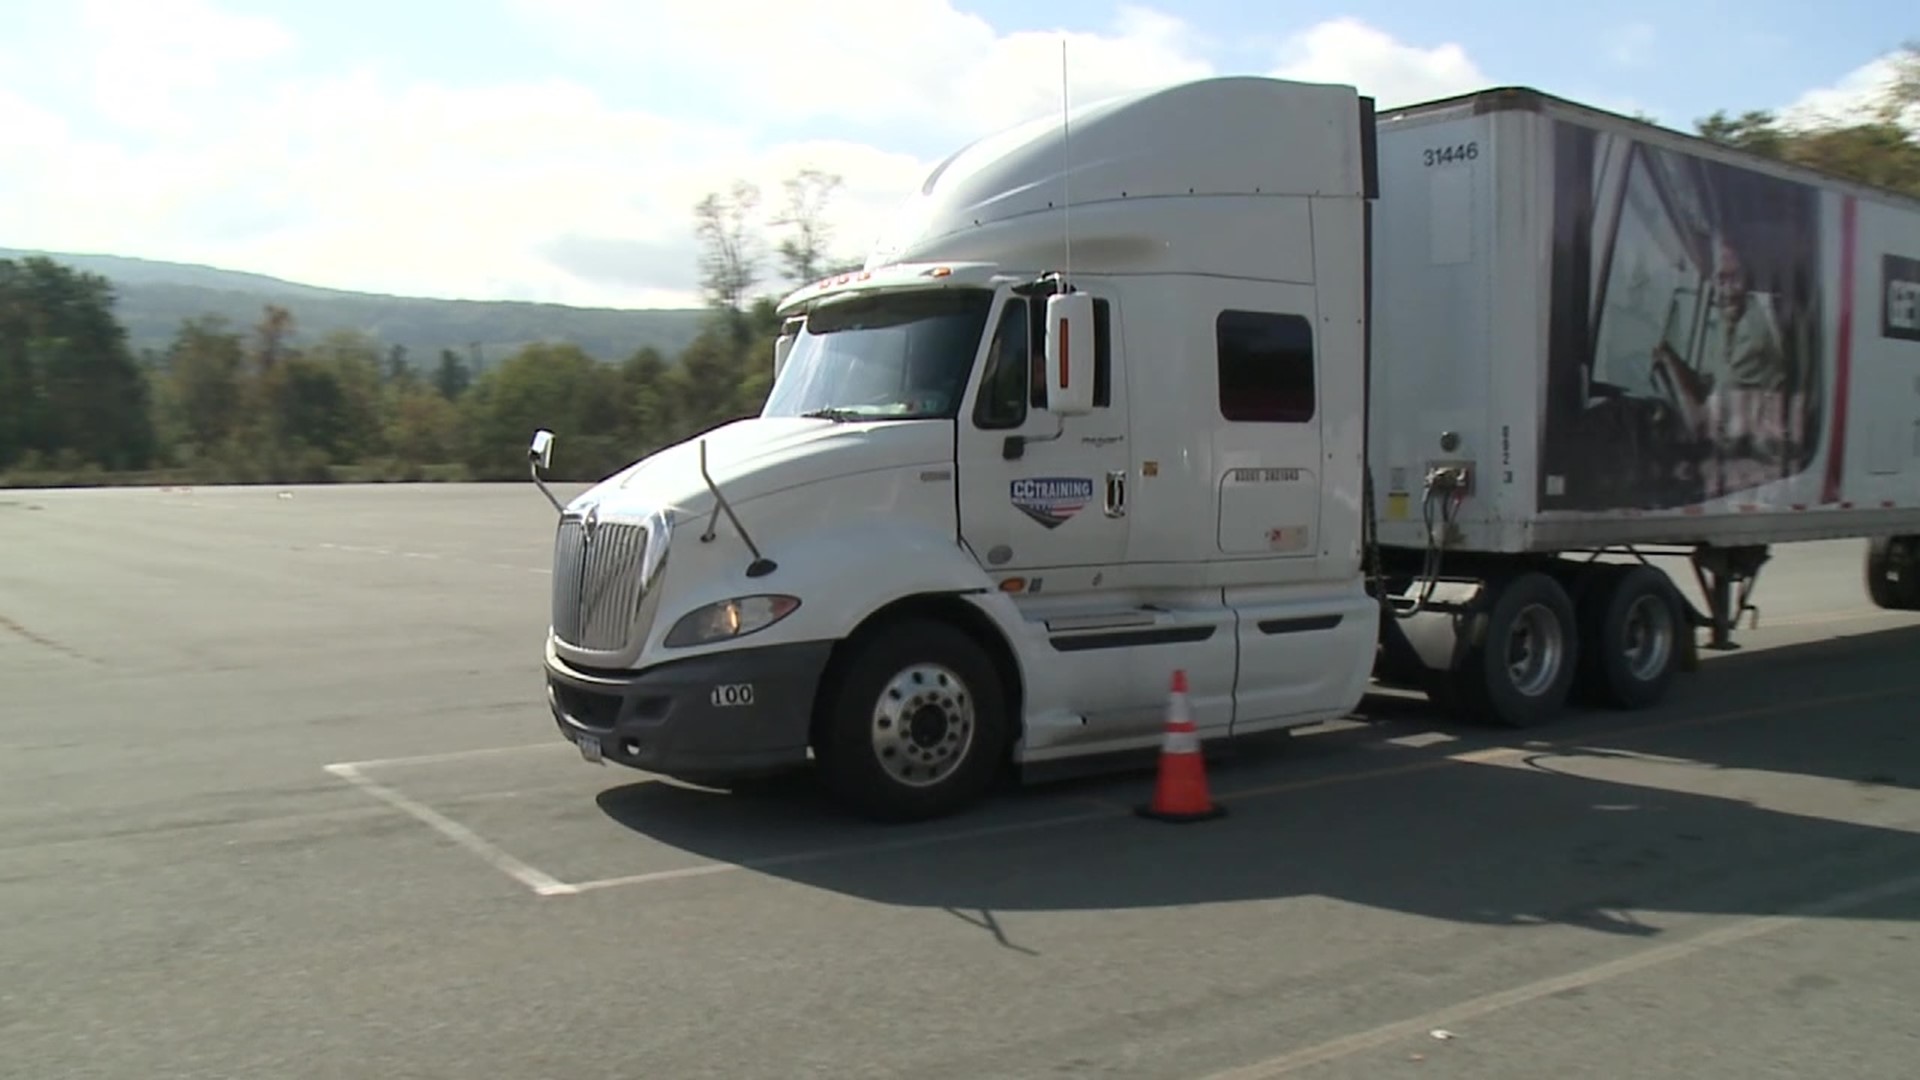 Luzerne County Community College has a course to get you a commercial driver's license and get out on the road.